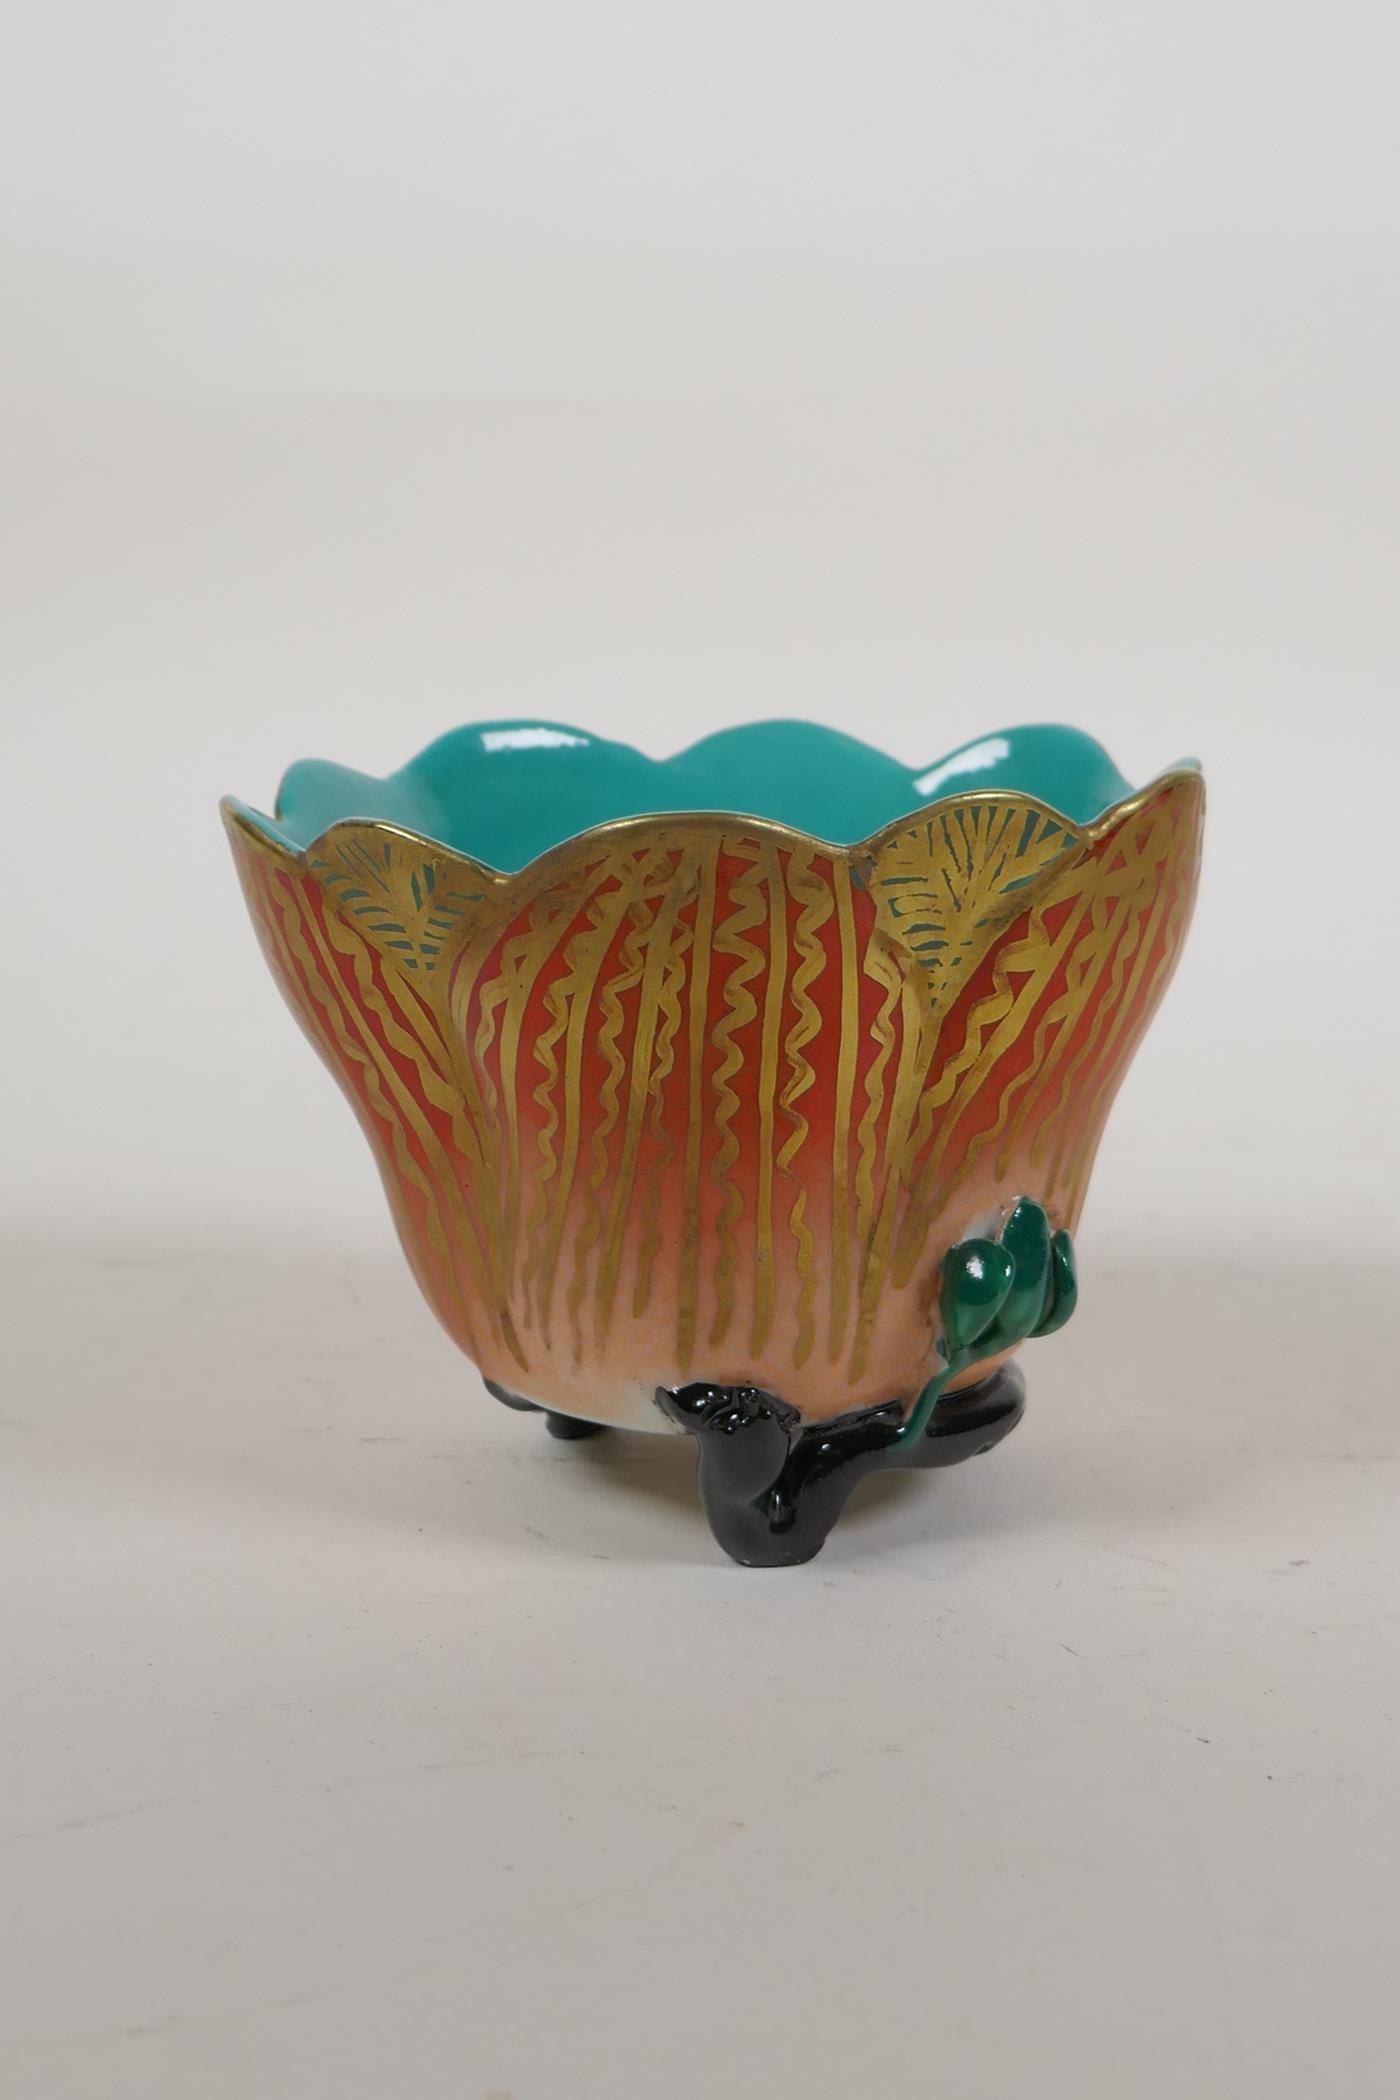 A polychrome porcelain lotus flower shaped rice bowl on a root wood style tripod base, 4 character